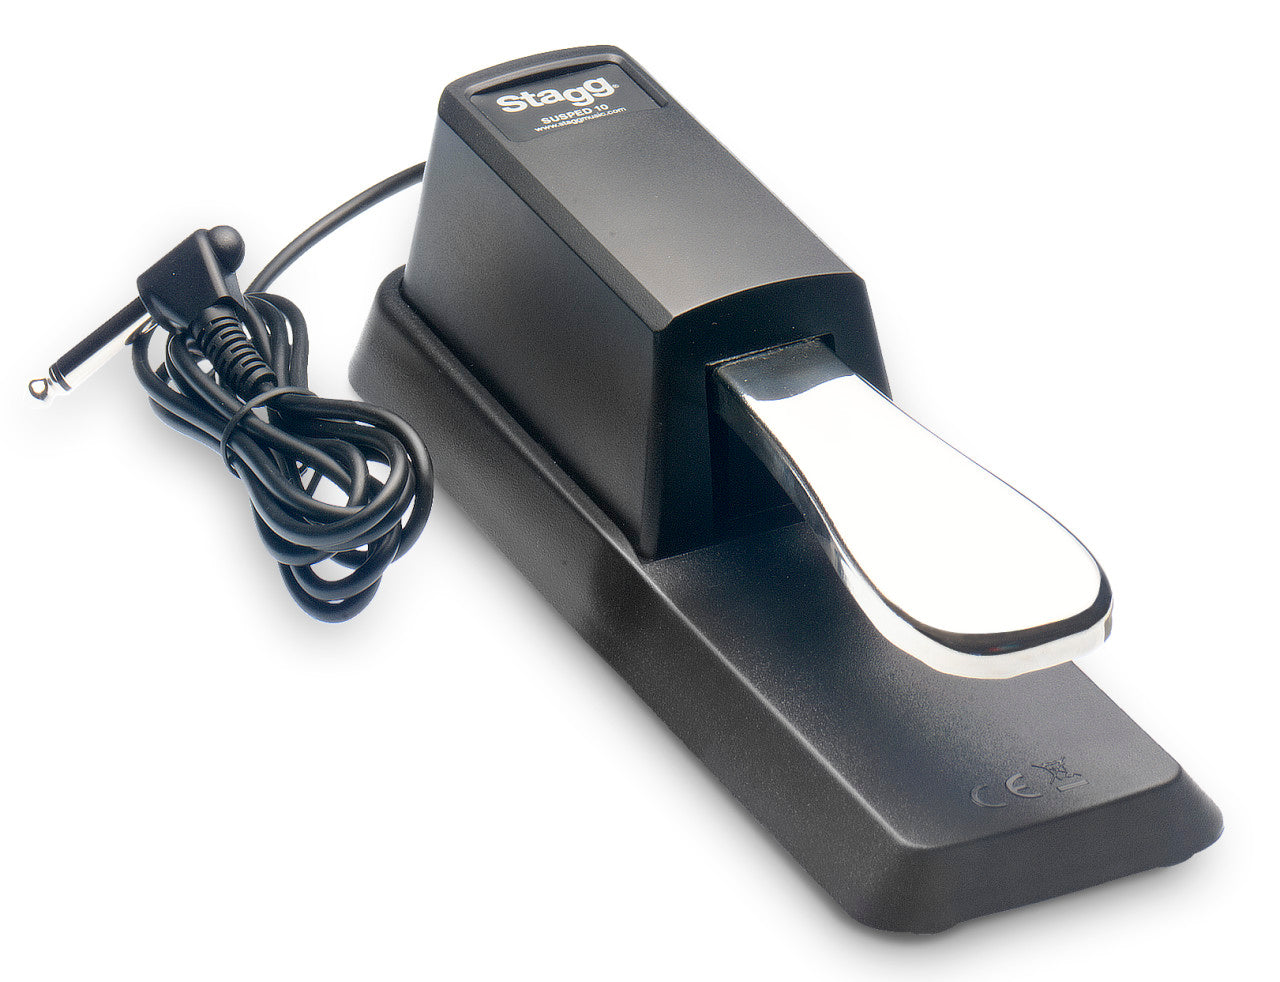 STAGG Universal SUSPED10 Sustain Pedal for Keyboard & Digital Piano, STAGG, PEDAL & EFFECTS ACCESSORIES, stagg-pedal-effects-accessories-susped10, ZOSO MUSIC SDN BHD